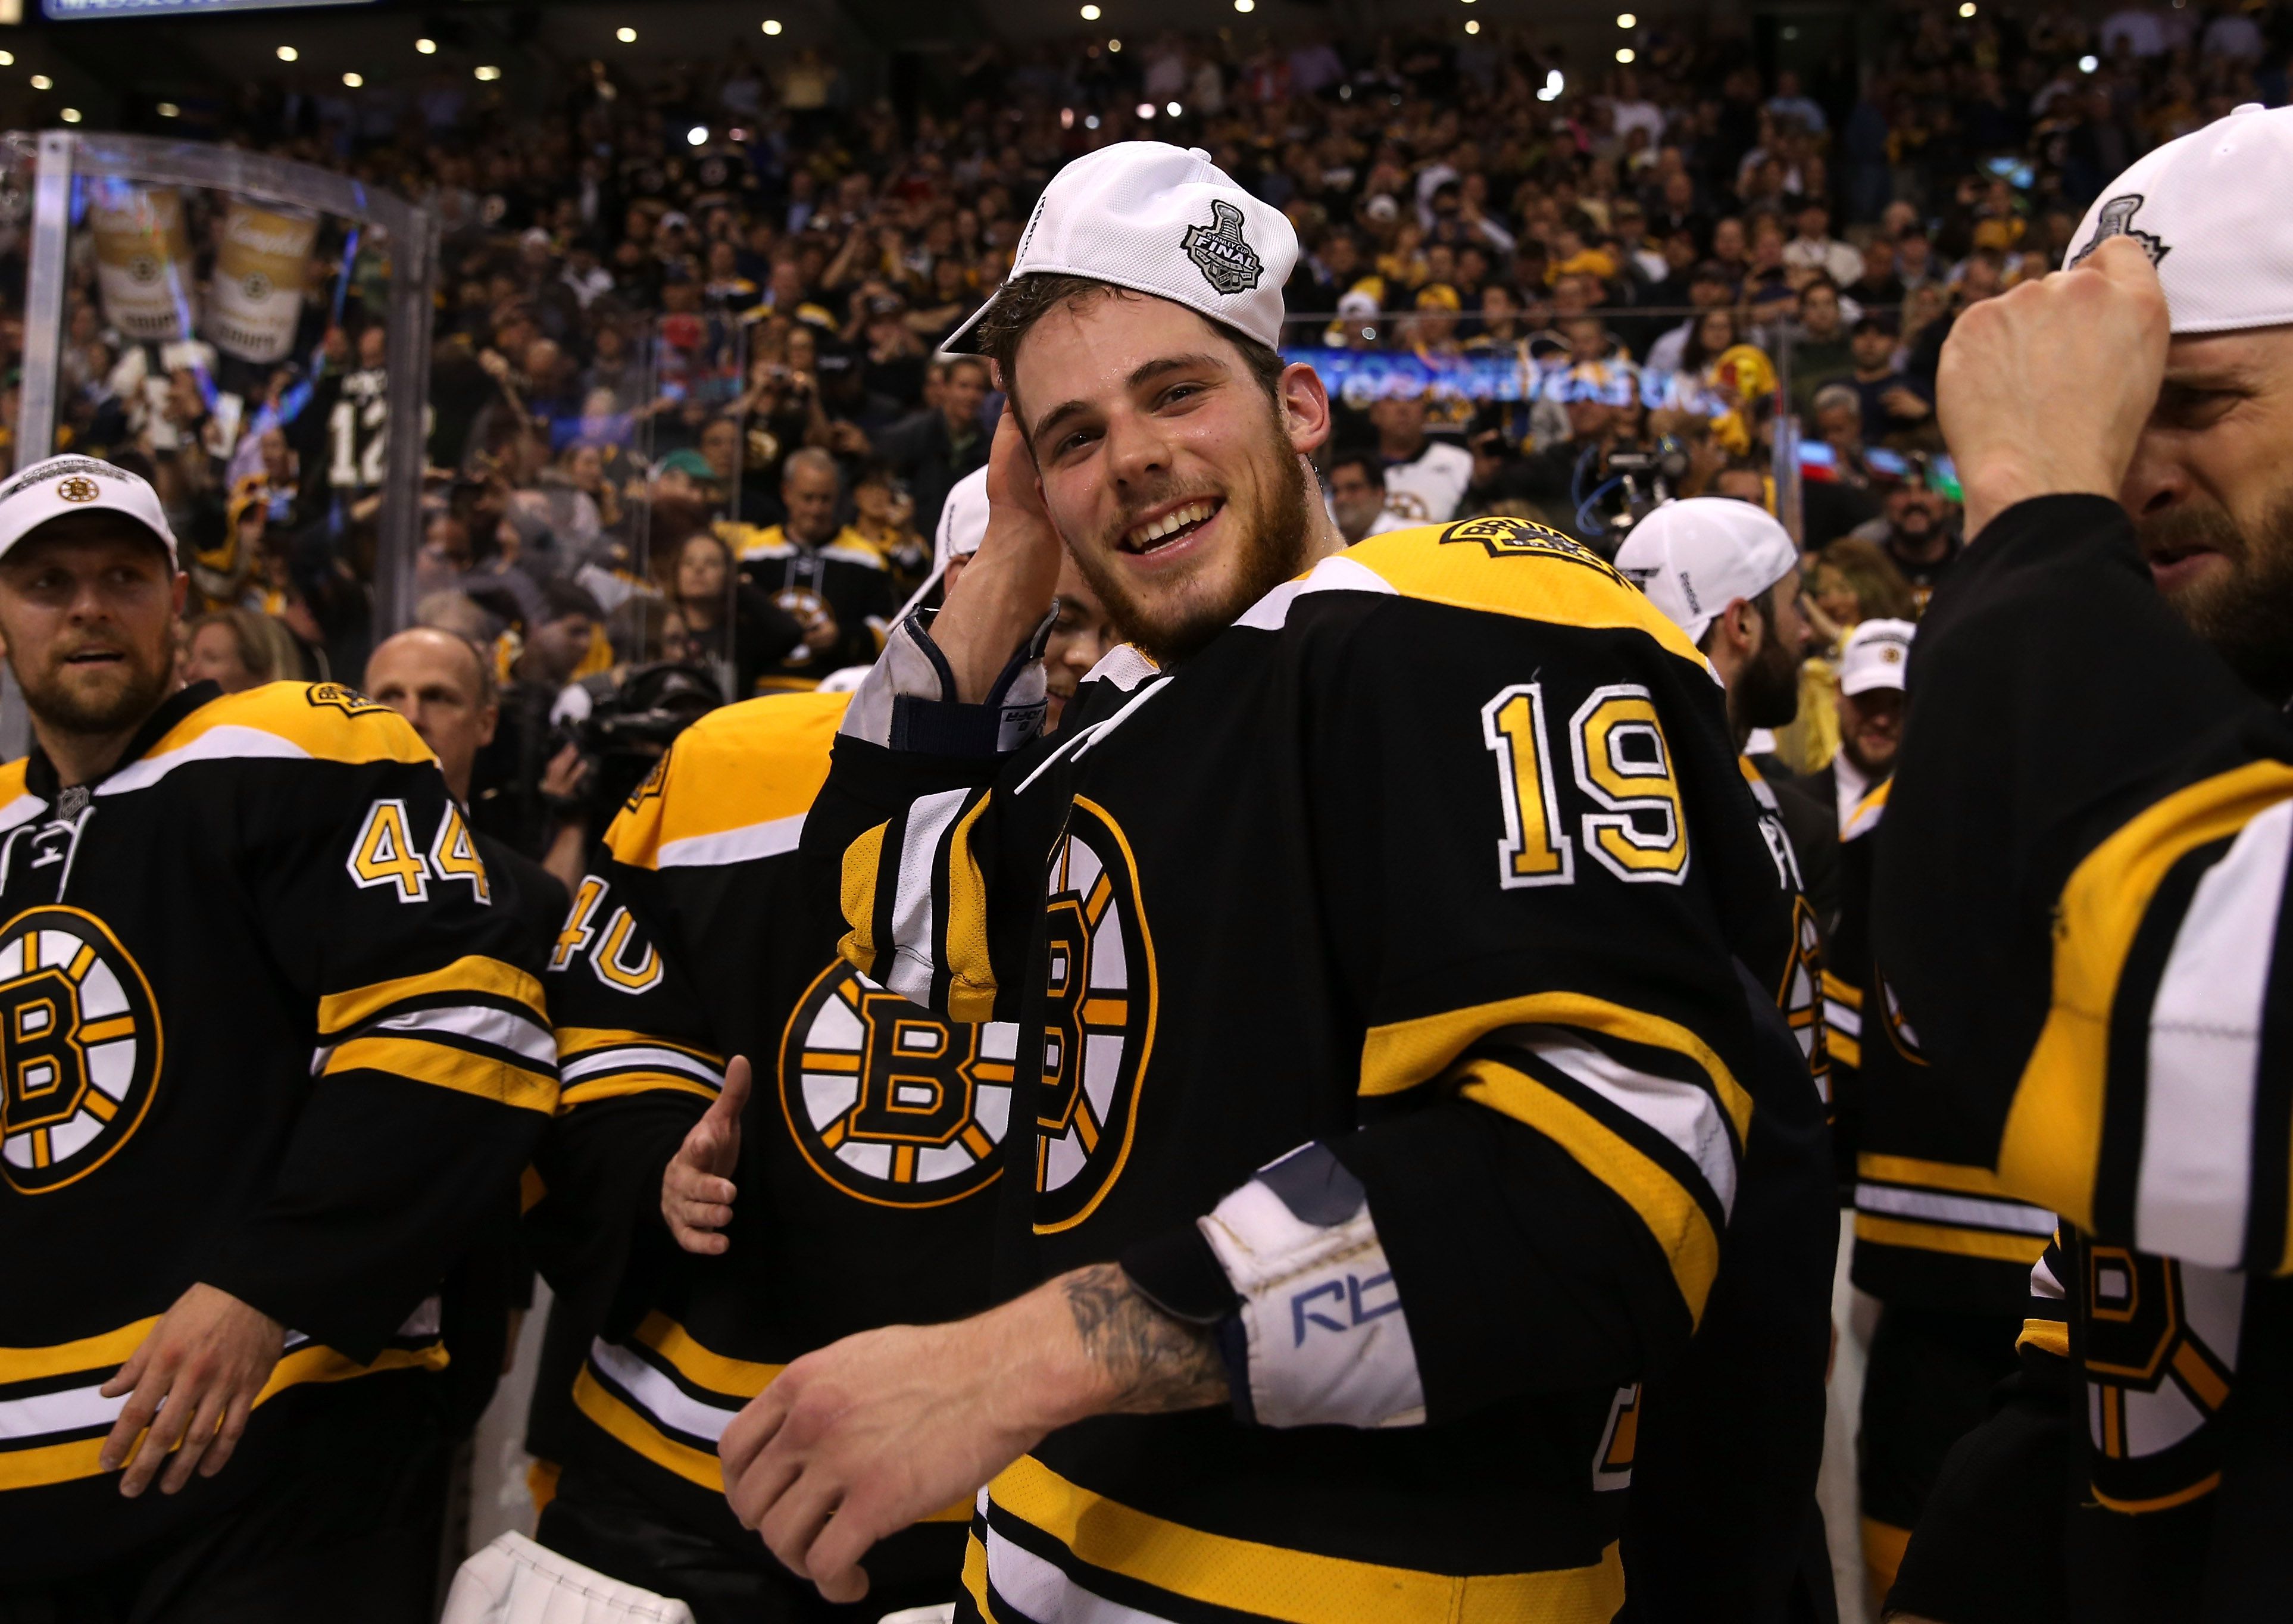 Tyler Seguin's party lifestyle irked Boston Bruins, father says